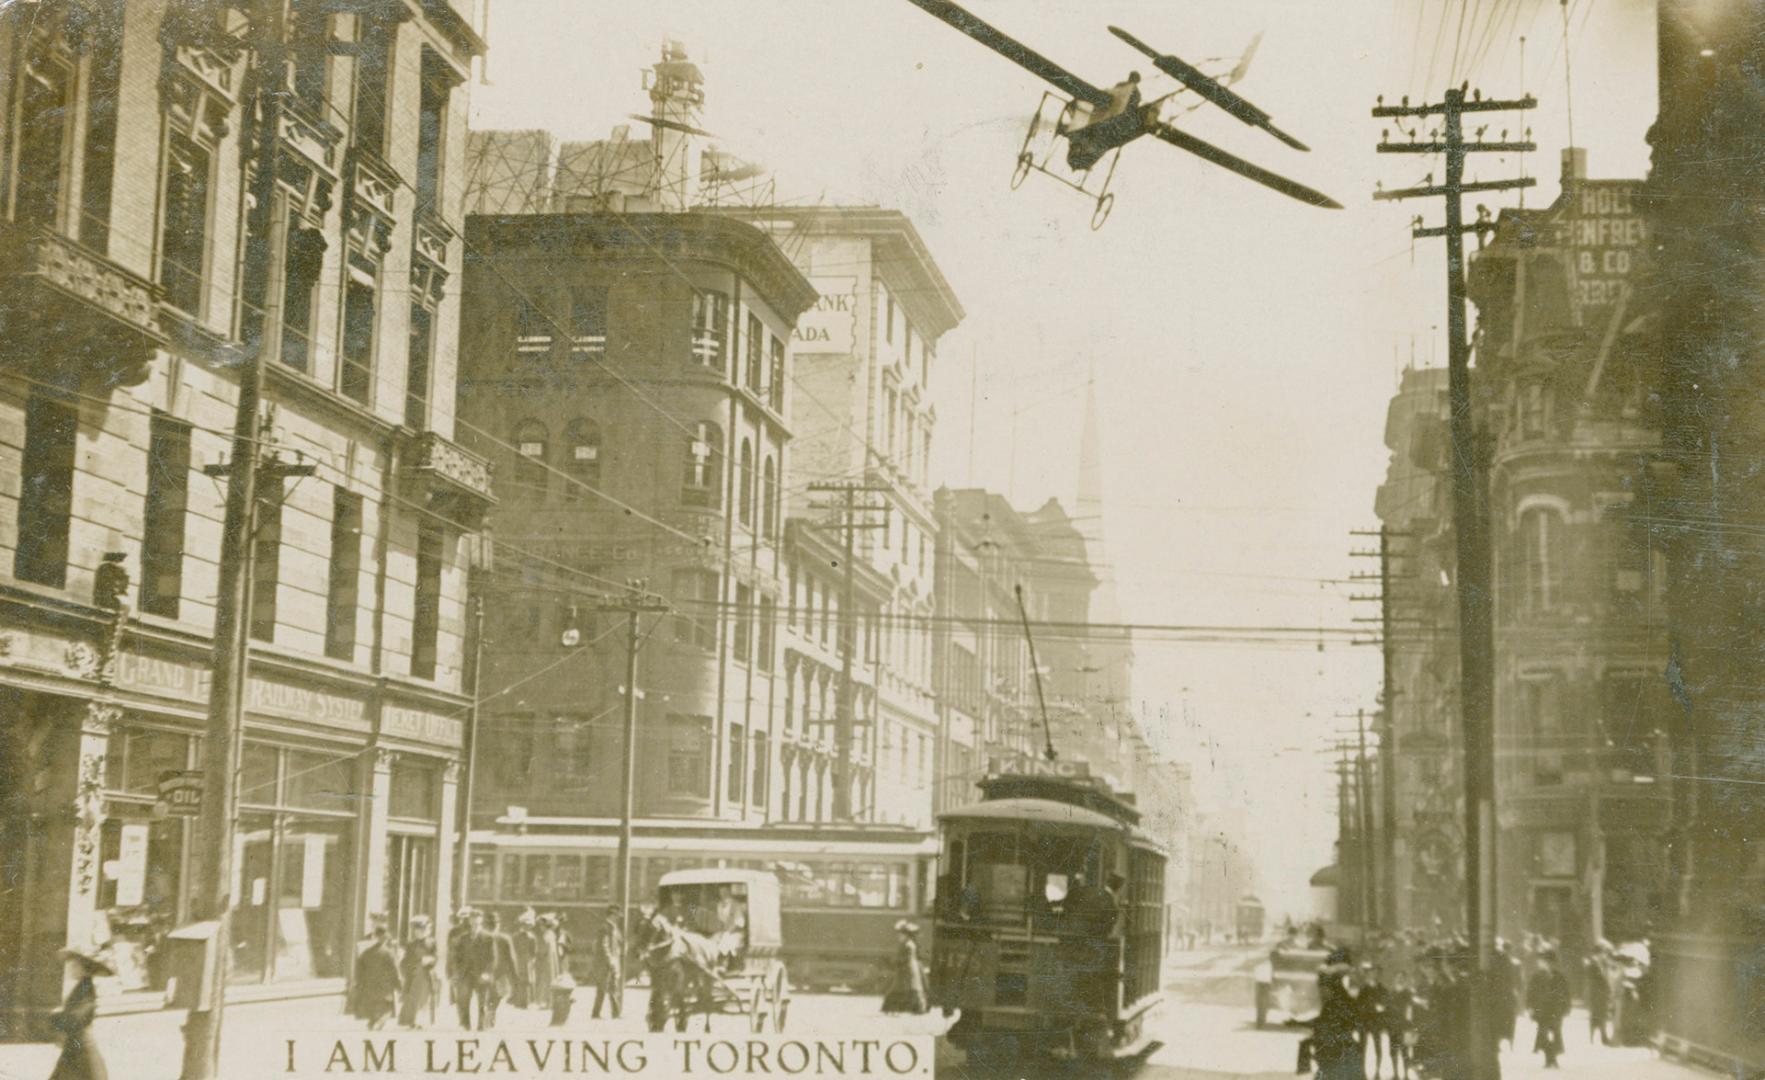 Black and white photograph of an airplane flying over a busy city street.